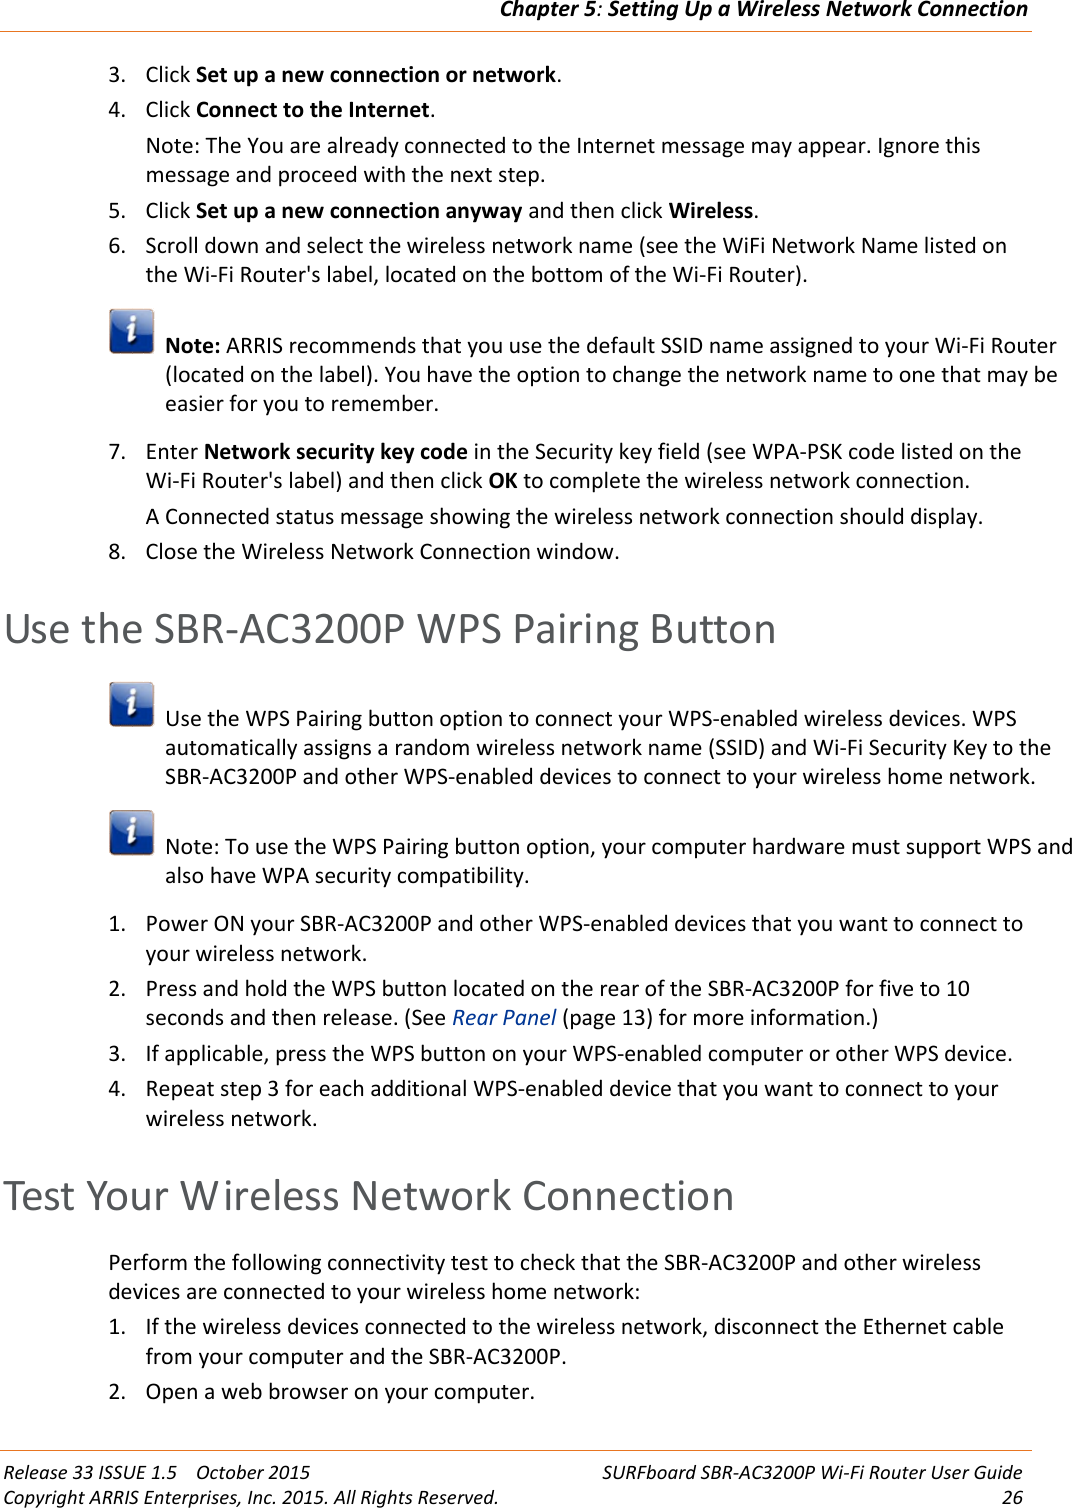 Chapter 5:Setting Up a Wireless Network ConnectionRelease 33 ISSUE 1.5 October 2015 SURFboard SBR-AC3200P Wi-Fi Router User GuideCopyright ARRIS Enterprises, Inc. 2015. All Rights Reserved. 263. Click Set up a new connection or network.4. Click Connect to the Internet.Note: The You are already connected to the Internet message may appear. Ignore thismessage and proceed with the next step.5. Click Set up a new connection anyway and then click Wireless.6. Scroll down and select the wireless network name (see the WiFi Network Name listed onthe Wi-Fi Router&apos;s label, located on the bottom of the Wi-Fi Router).Note: ARRIS recommends that you use the default SSID name assigned to your Wi-Fi Router(located on the label). You have the option to change the network name to one that may beeasier for you to remember.7. Enter Network security key code in the Security key field (see WPA-PSK code listed on theWi-Fi Router&apos;s label) and then click OK to complete the wireless network connection.A Connected status message showing the wireless network connection should display.8. Close the Wireless Network Connection window.Use the SBR-AC3200P WPS Pairing ButtonUse the WPS Pairing button option to connect your WPS-enabled wireless devices. WPSautomatically assigns a random wireless network name (SSID) and Wi-Fi Security Key to theSBR-AC3200P and other WPS-enabled devices to connect to your wireless home network.Note: To use the WPS Pairing button option, your computer hardware must support WPS andalso have WPA security compatibility.1. Power ON your SBR-AC3200P and other WPS-enabled devices that you want to connect toyour wireless network.2. Press and hold the WPS button located on the rear of the SBR-AC3200P for five to 10seconds and then release. (See Rear Panel (page 13) for more information.)3. If applicable, press the WPS button on your WPS-enabled computer or other WPS device.4. Repeat step 3 for each additional WPS-enabled device that you want to connect to yourwireless network.Test Your Wireless Network ConnectionPerform the following connectivity test to check that the SBR-AC3200P and other wirelessdevices are connected to your wireless home network:1. If the wireless devices connected to the wireless network, disconnect the Ethernet cablefrom your computer and the SBR-AC3200P.2. Open a web browser on your computer.